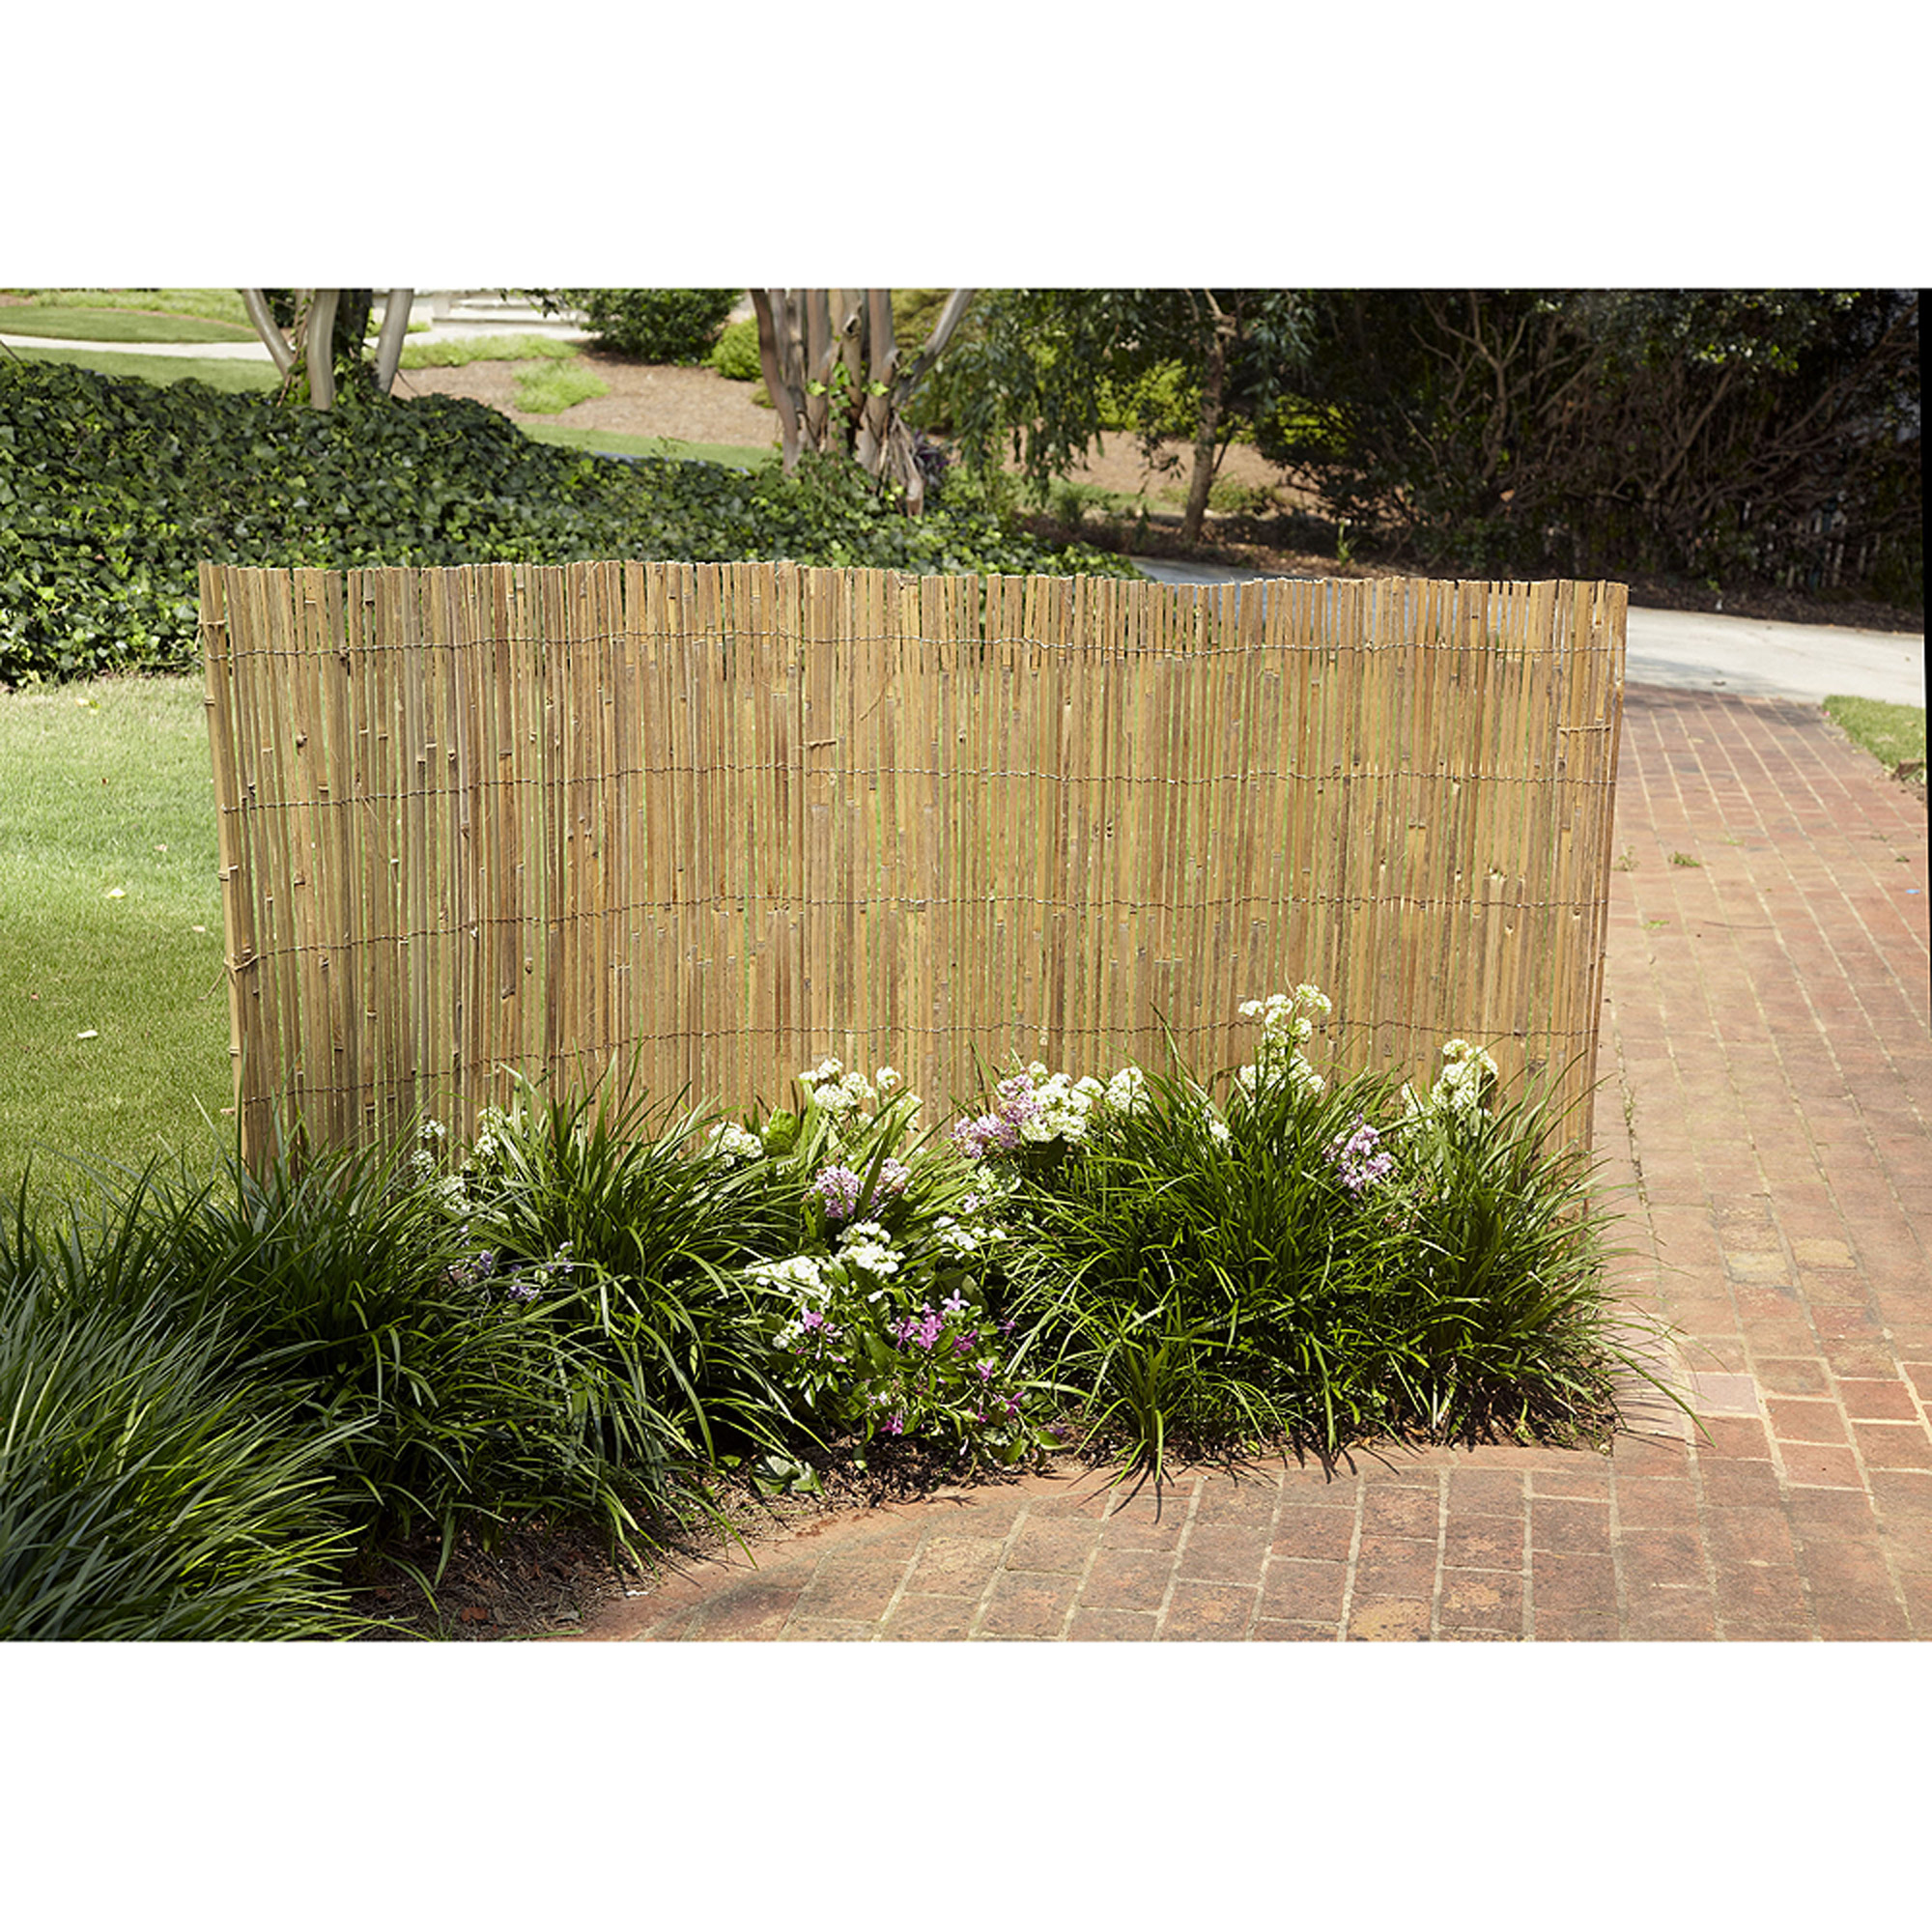 Gardenpath 1/2 In. Outside Peel Bamboo Fence, 4 ft. H x 8 ft. L ...